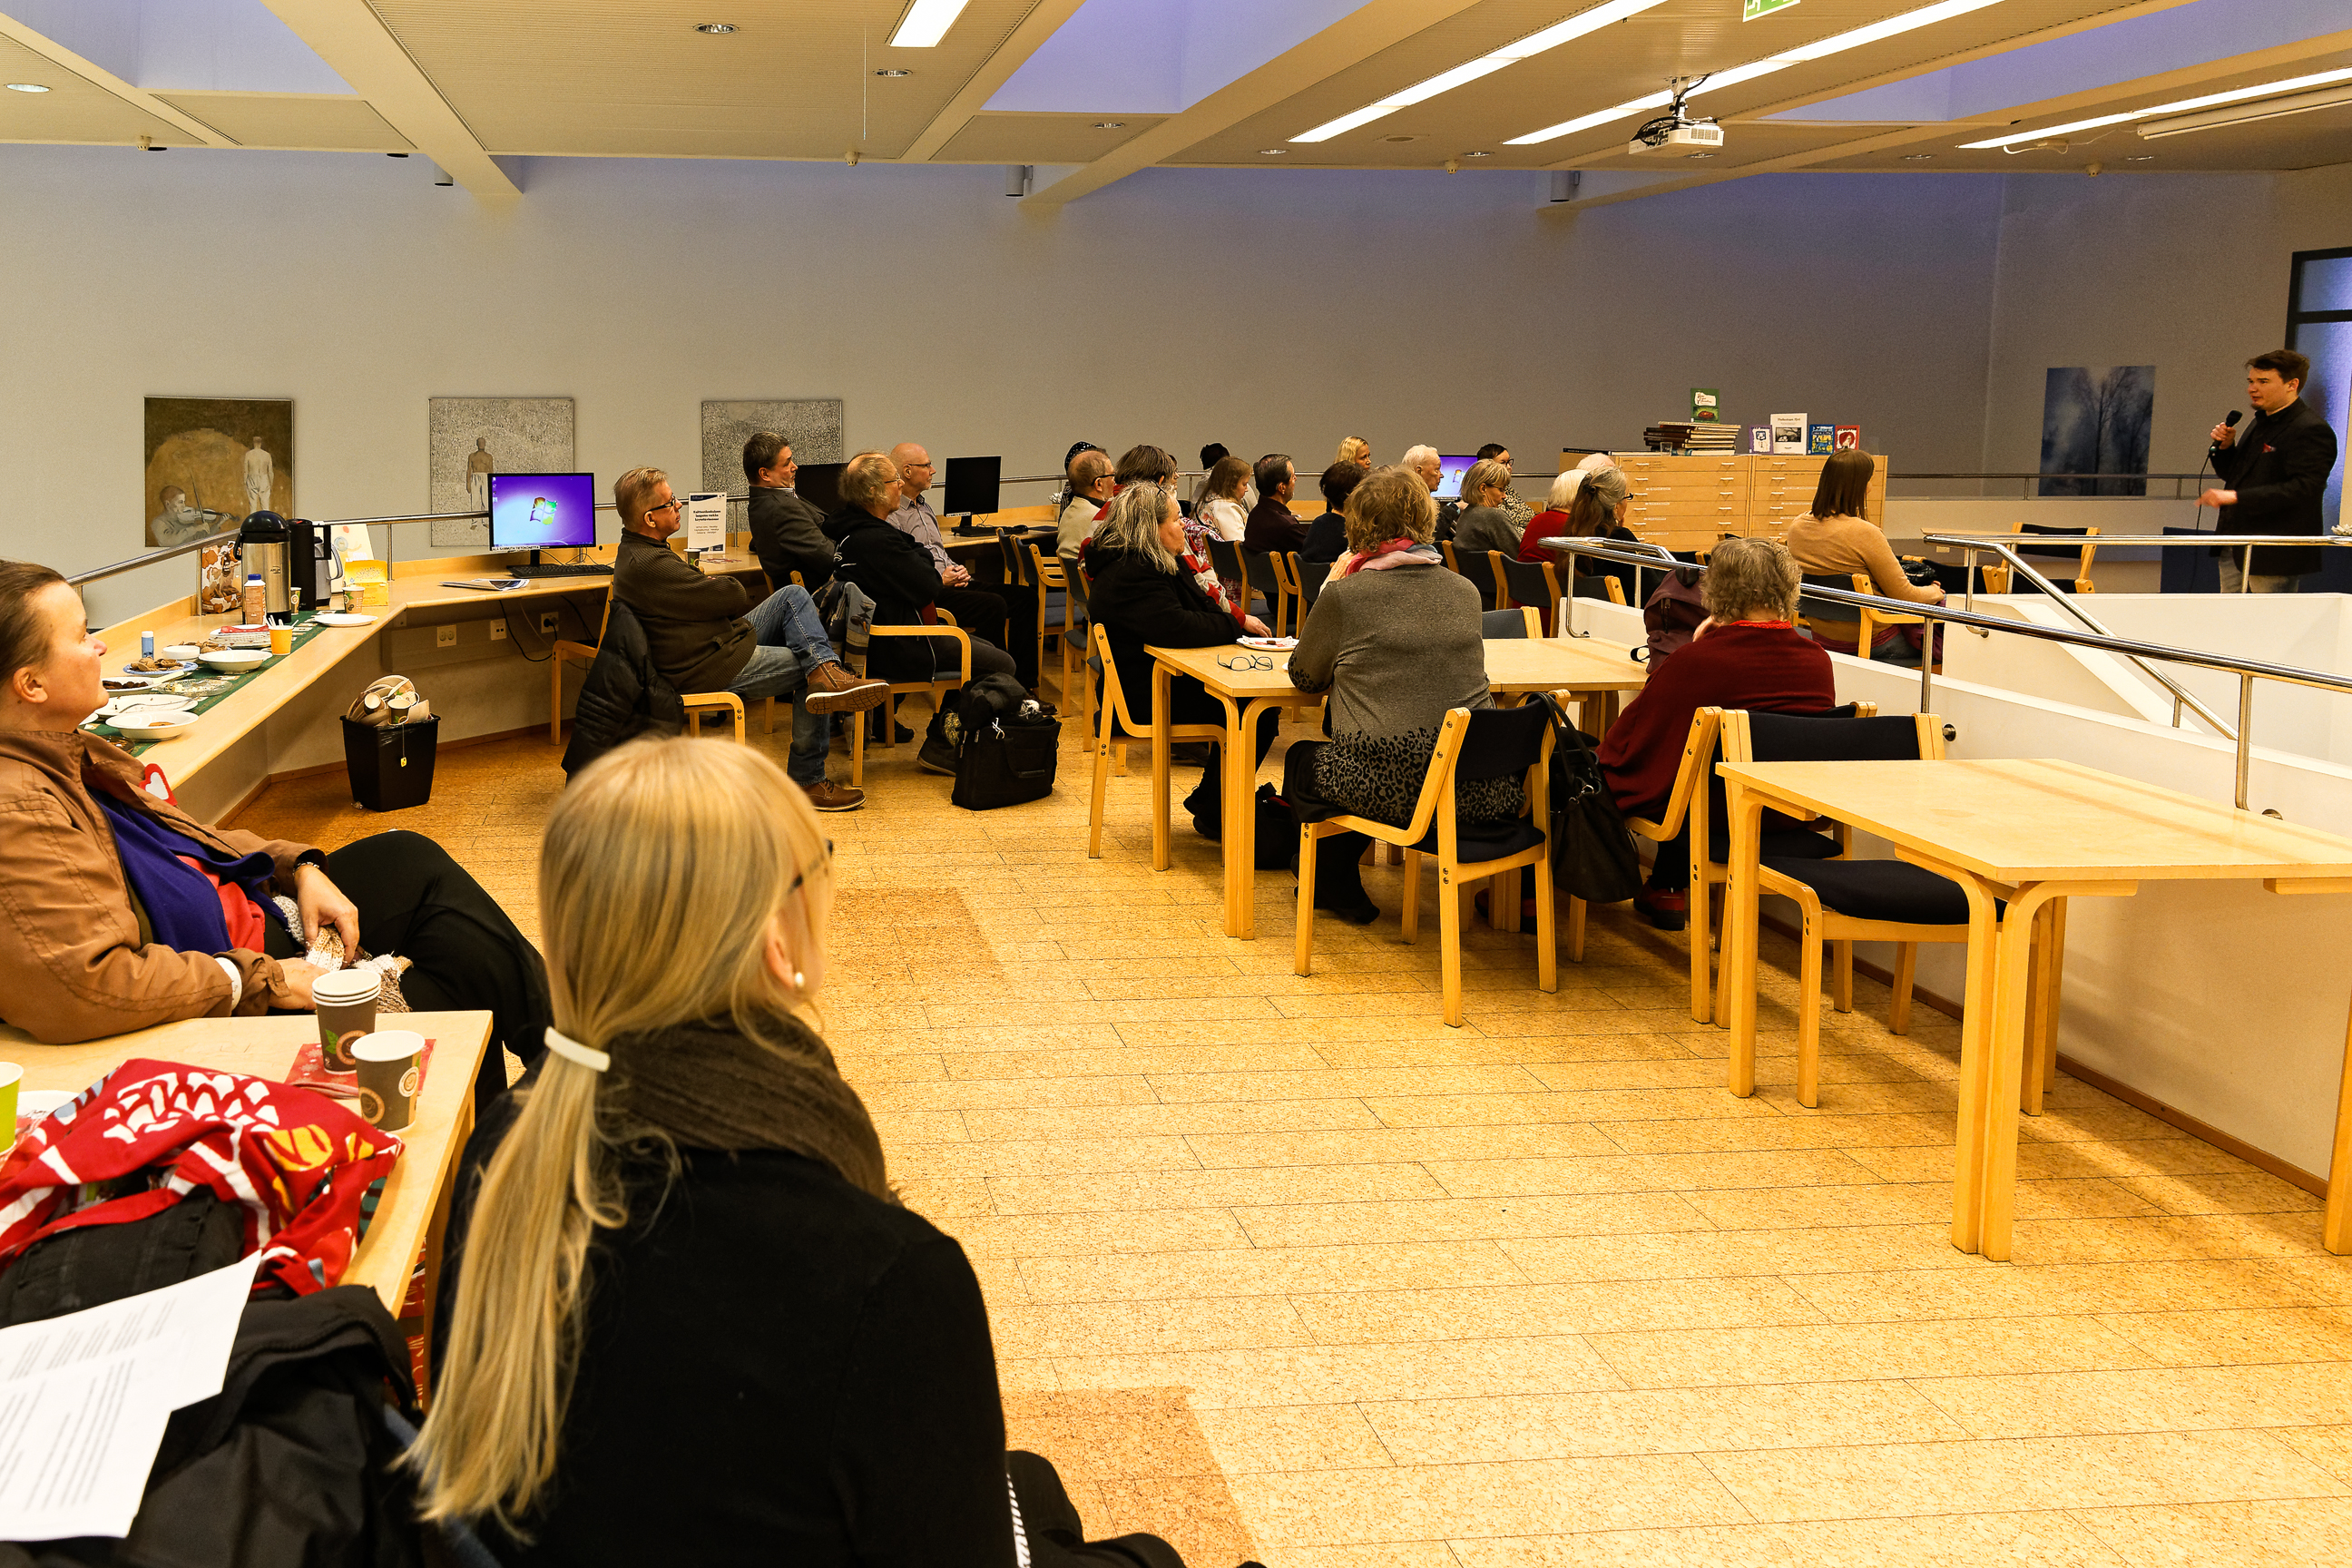 Audience listening to author Antti Heikkinen’s energetic performance.